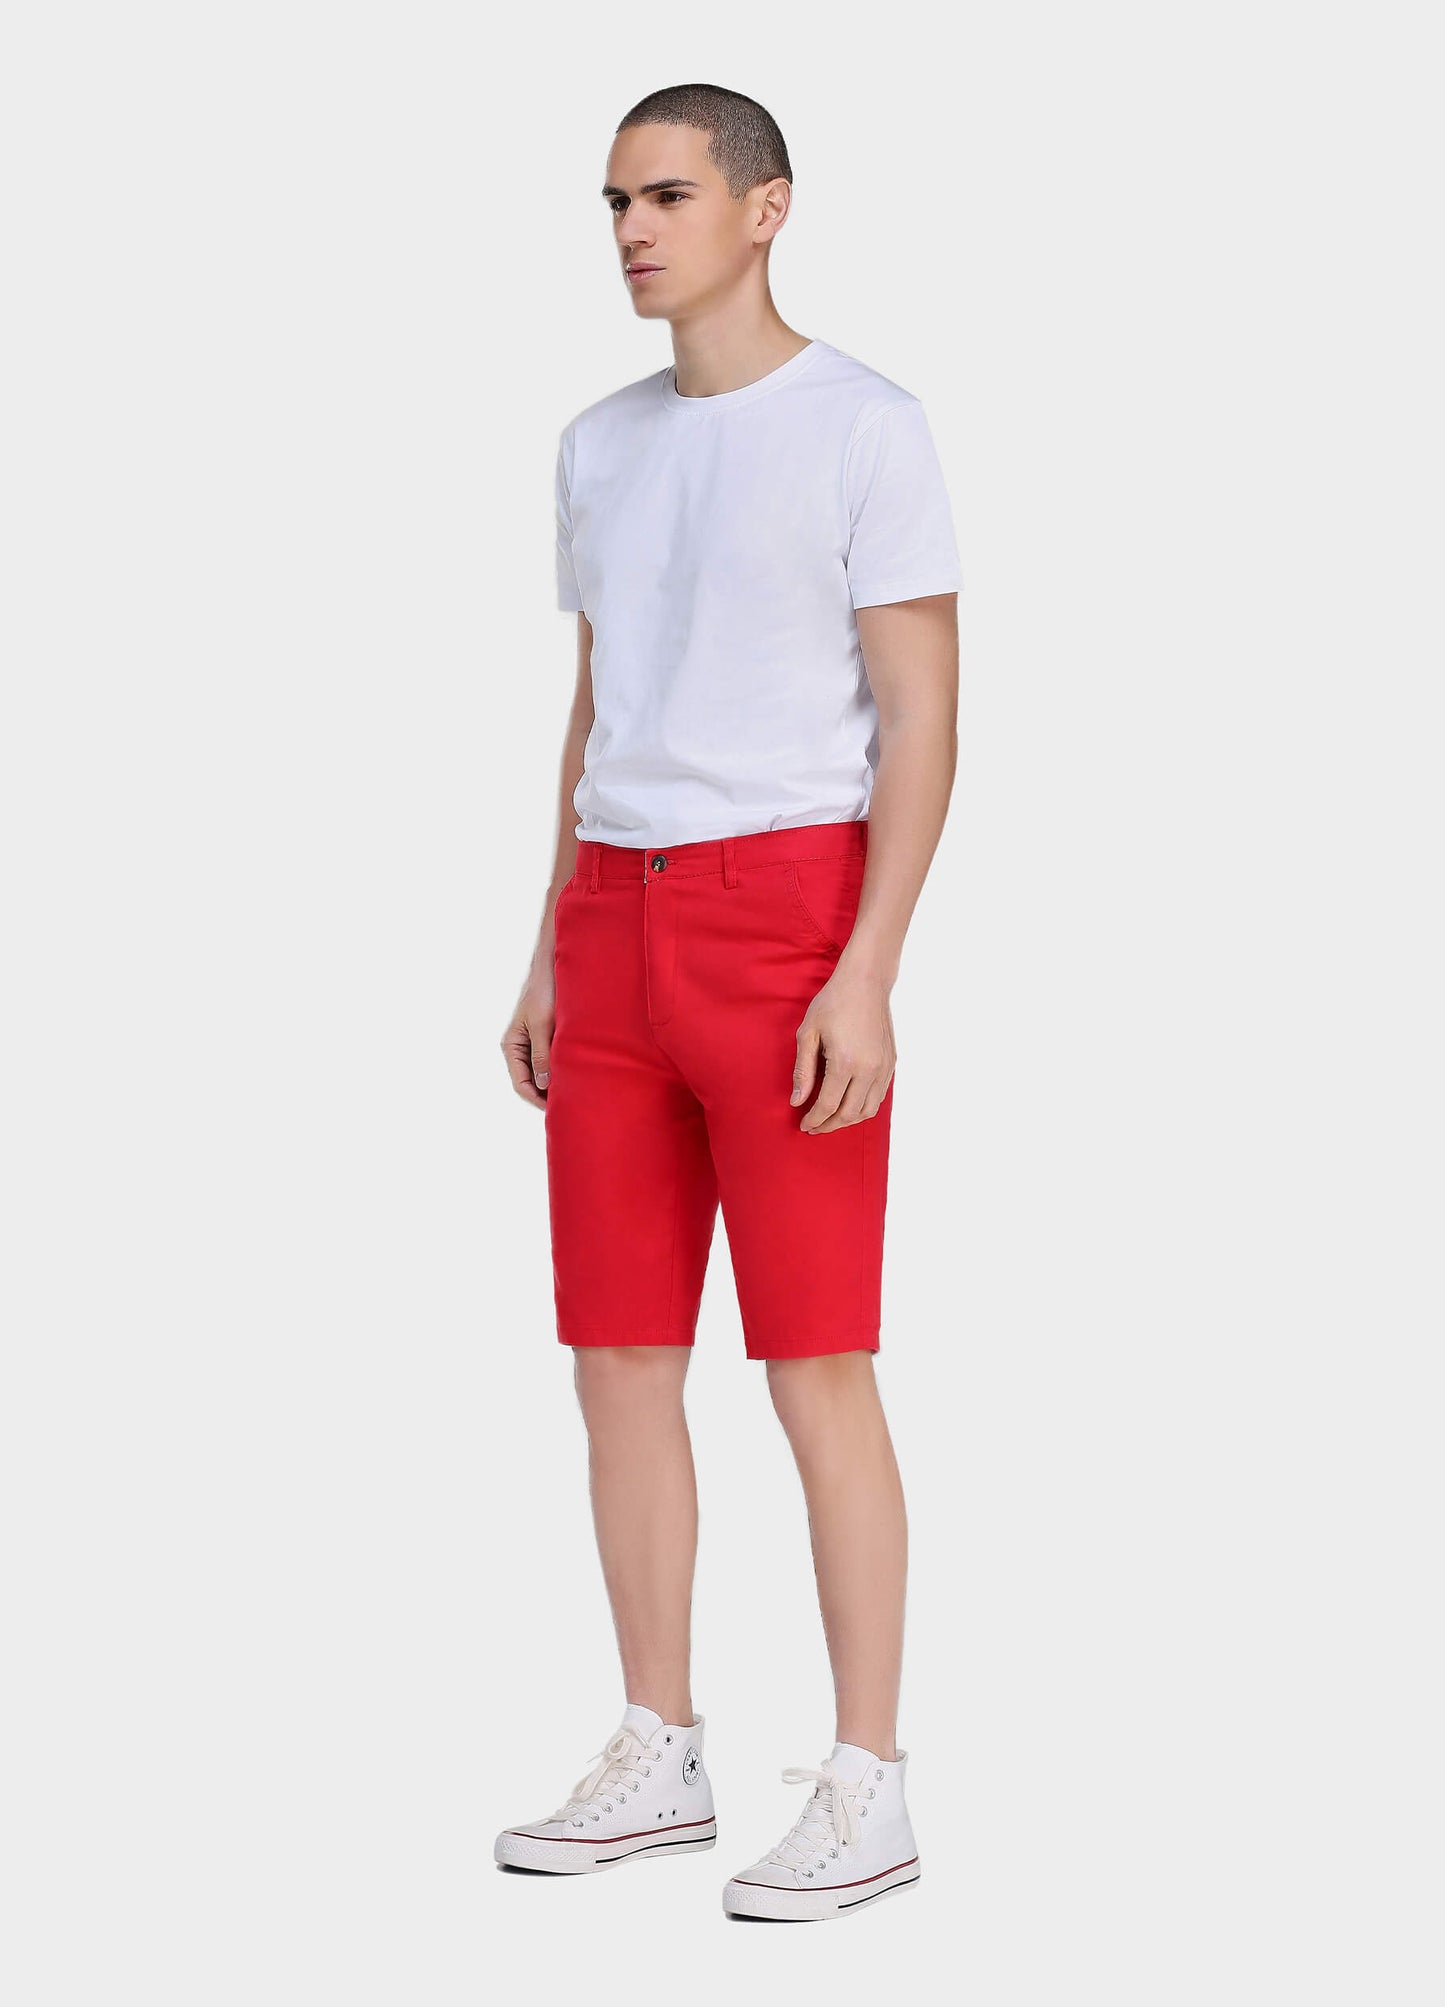 Men's Casual Zipper Fly Button Solid Shorts with Slant Pocket-Red side view